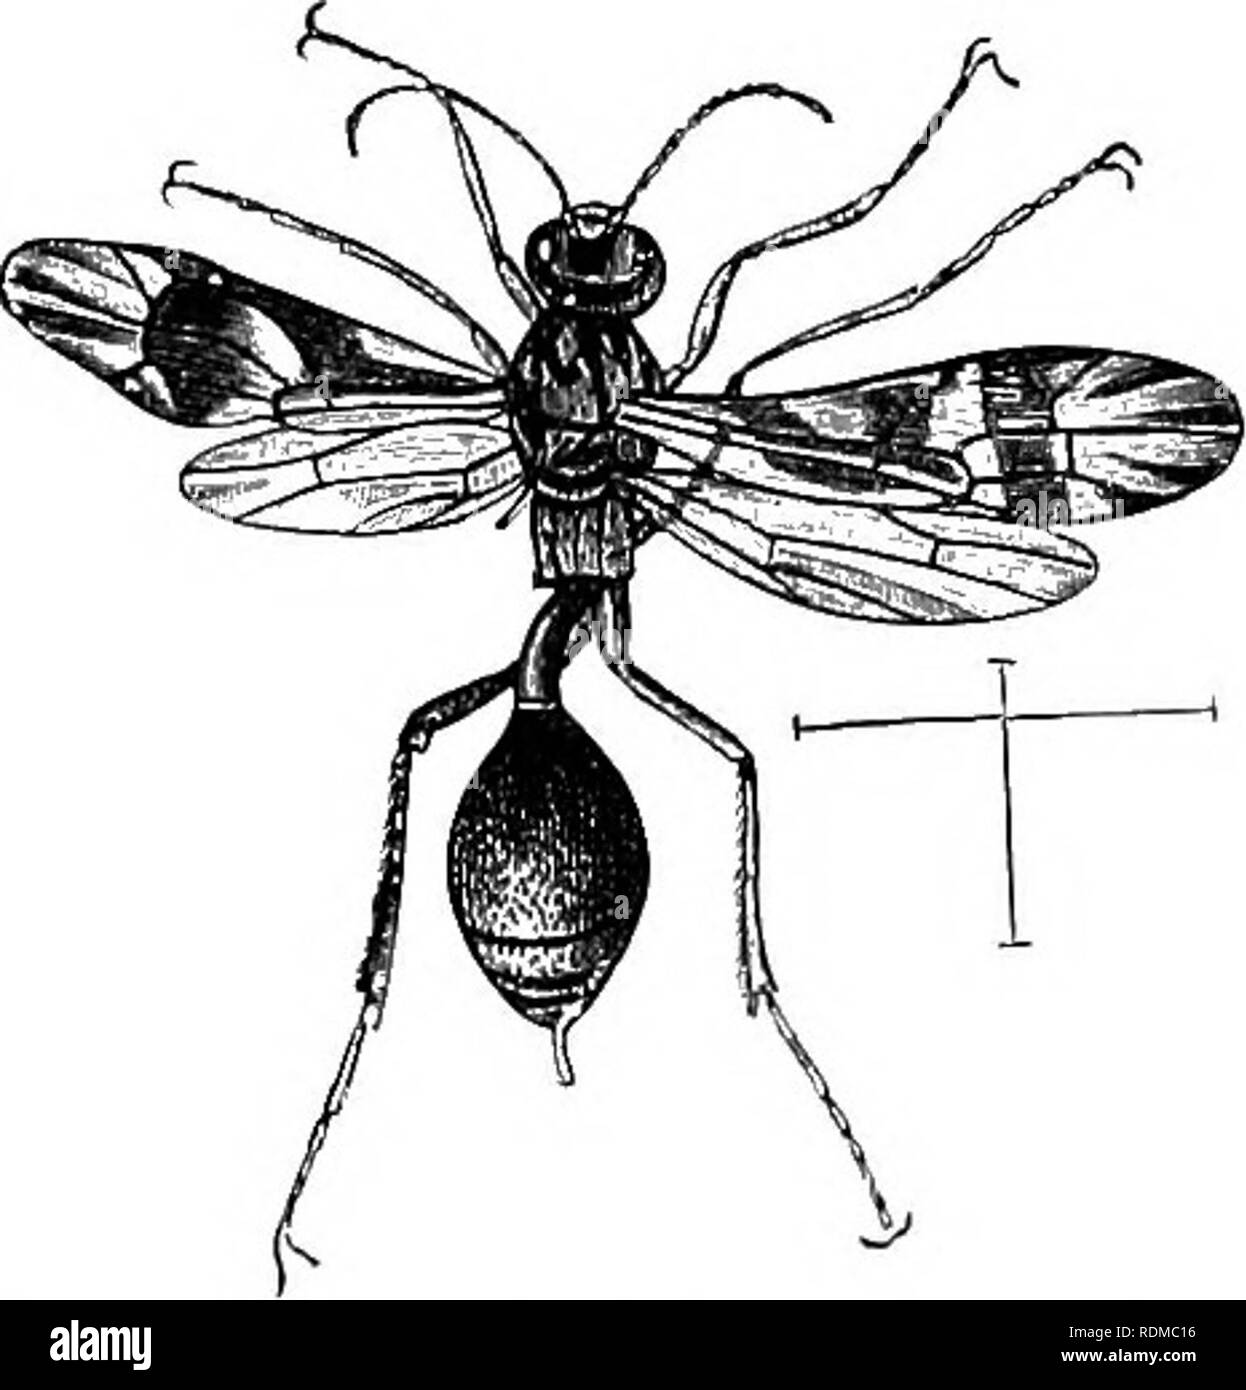 . The Cambridge natural history. Zoology. ICHNEUMON-FLIES 557 either all Hcmitehs or all Pesomaclnis. It is to be hoped that this interesting case will be fully elucidated. Although the Ichneumonidae are perhaps the most purely carnivorous of all the great families of Hymenoptera, there is nevertheless reason for supposing that some of them can be nourished with vegetable substances during a part at any rate of the larval existence, Giraud and Cameron ^ having recorded observa- tions that lead to the conclusion that some species of the genus Pimpla may inhabit galls and live on the substance,  Stock Photo